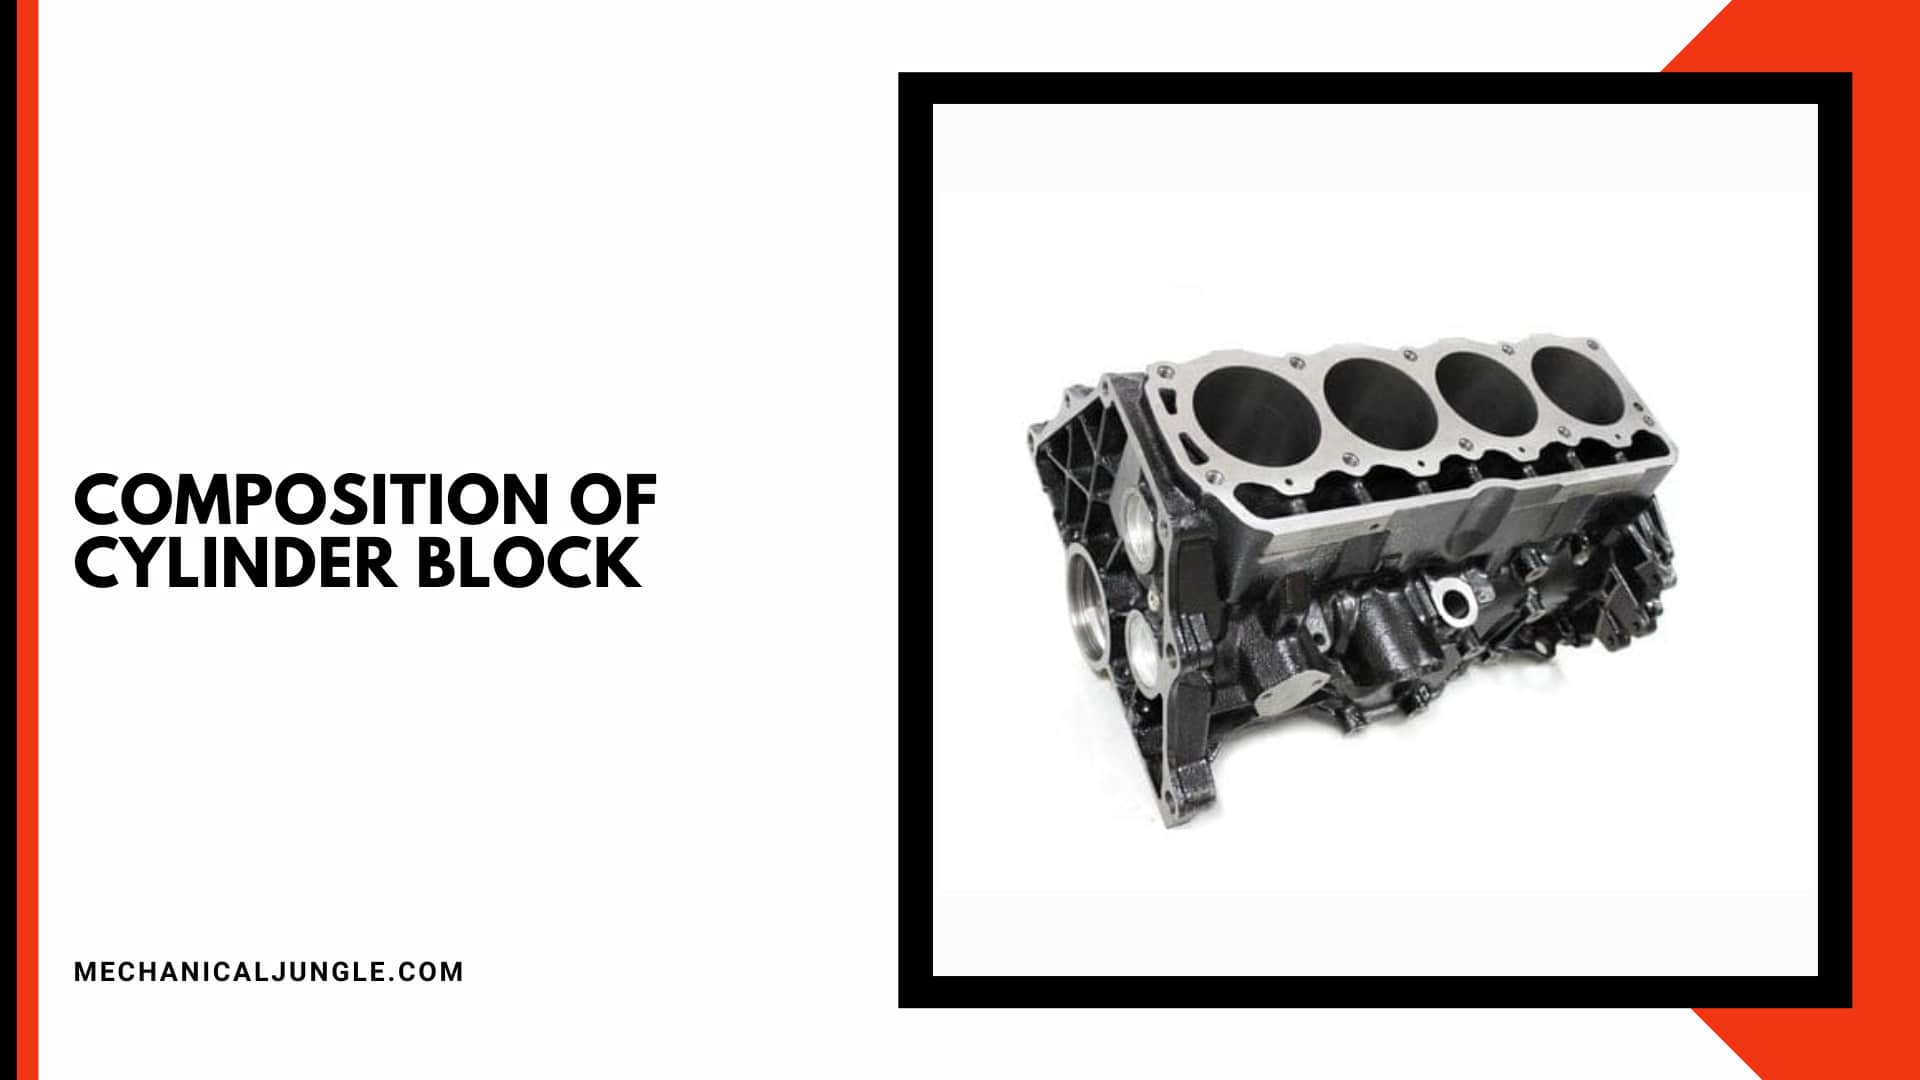 Composition of Cylinder Block